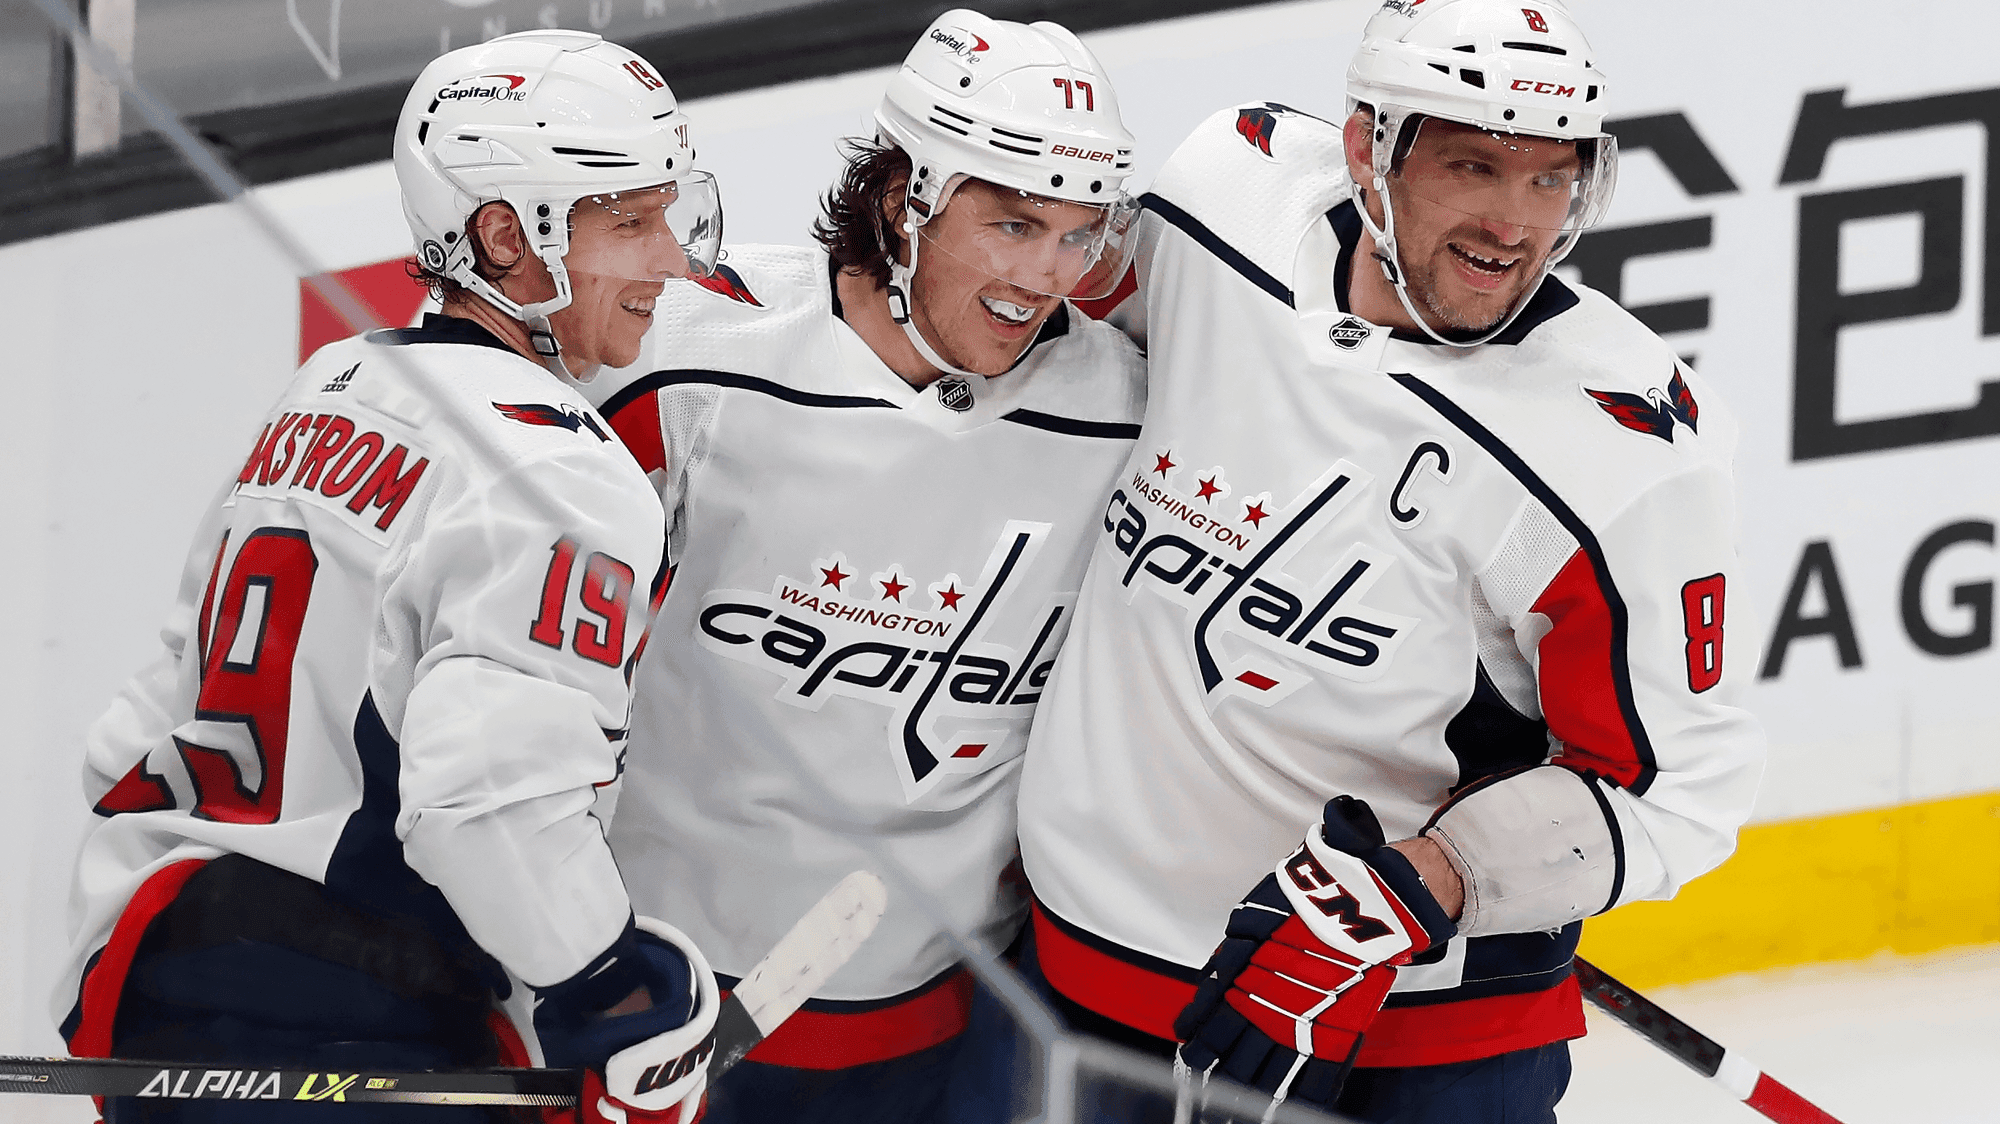 Washington Capitals vs. Carolina Hurricanes free NHL live stream (2/18/23)  How to watch, time, channel, betting odds 